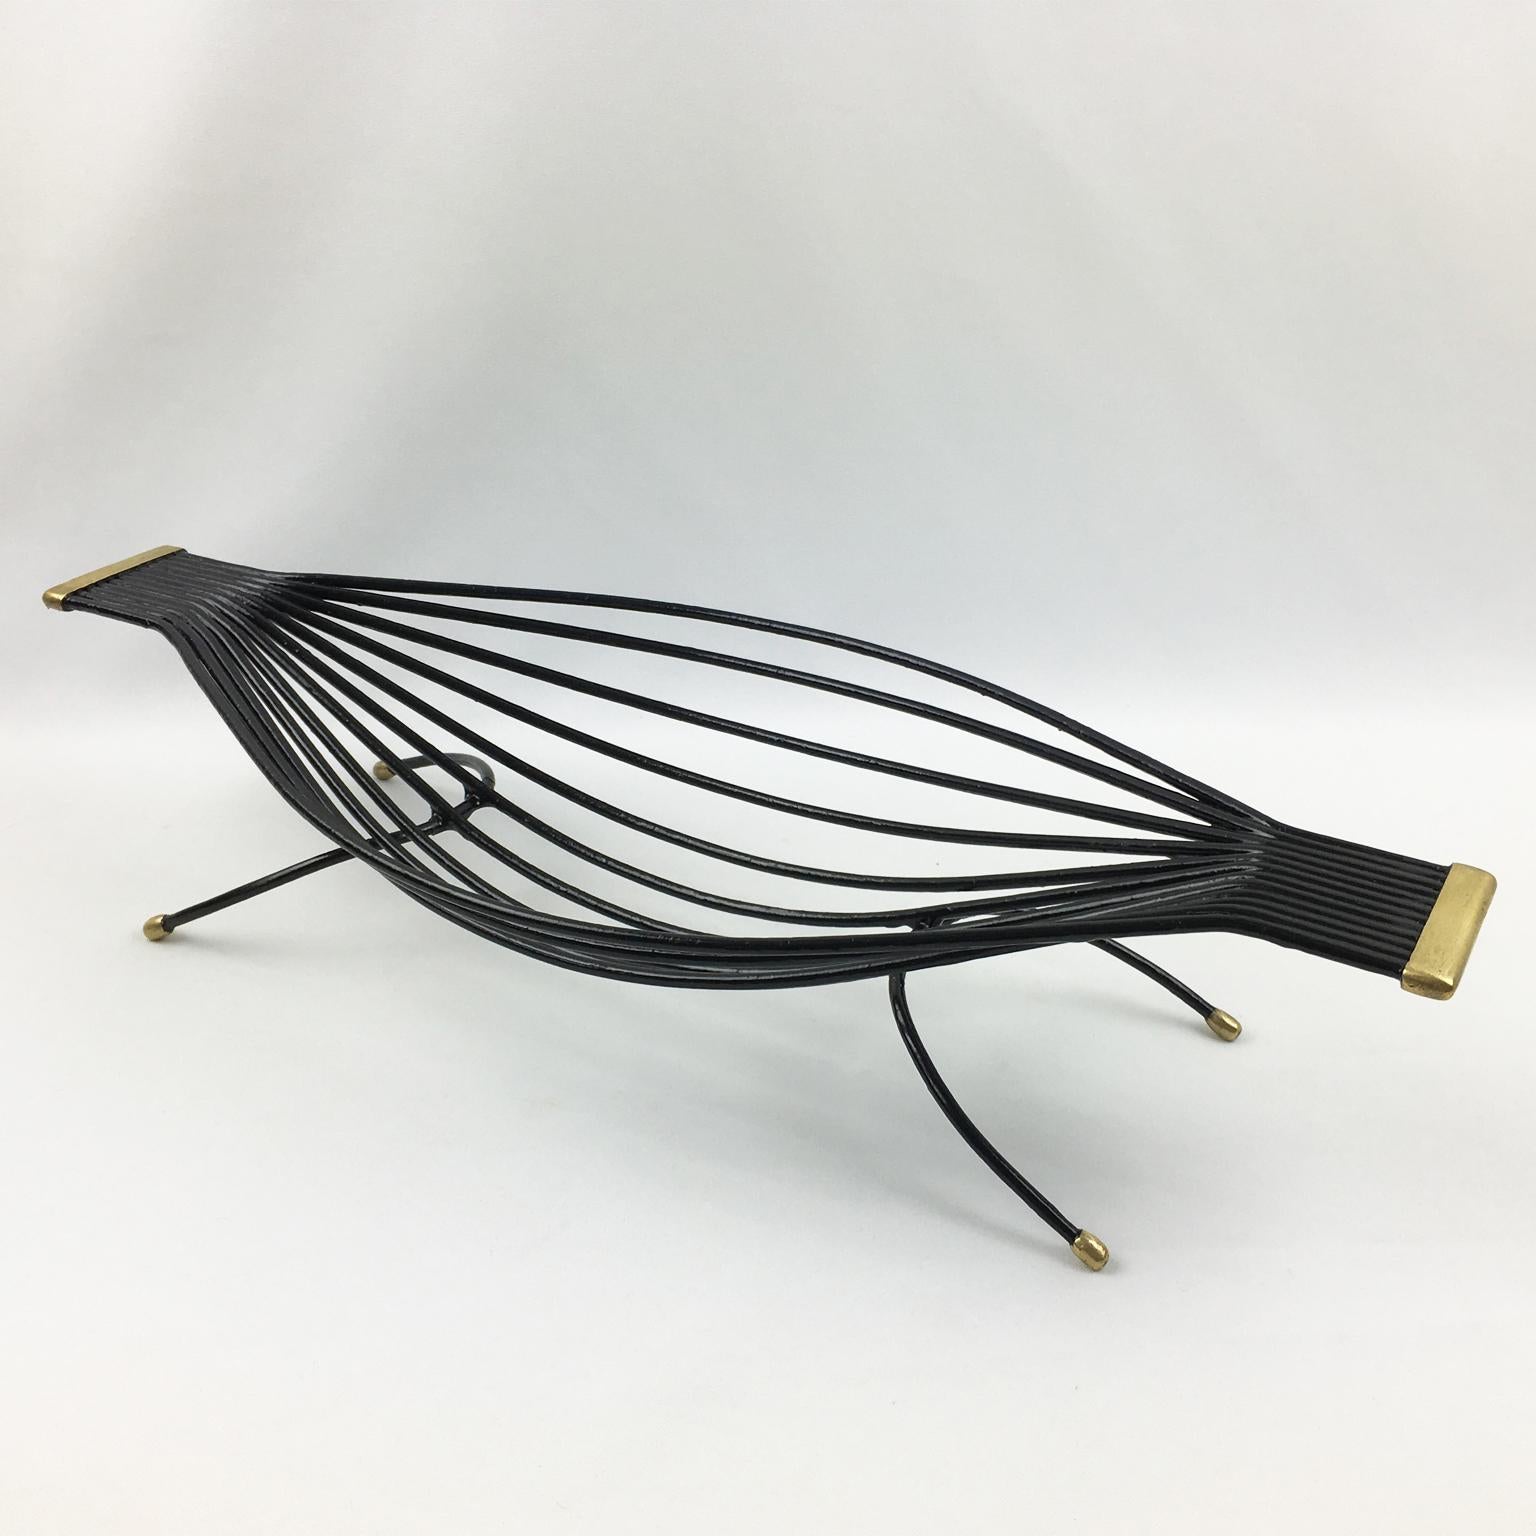 This lovely 1960s modernist metal fruit bowl, basket, or decorative centerpiece has an original black paint patina with polished brass feet and handles. The elongated hammock shape has a zoomorphic flair with thin metal rods. There is no visible